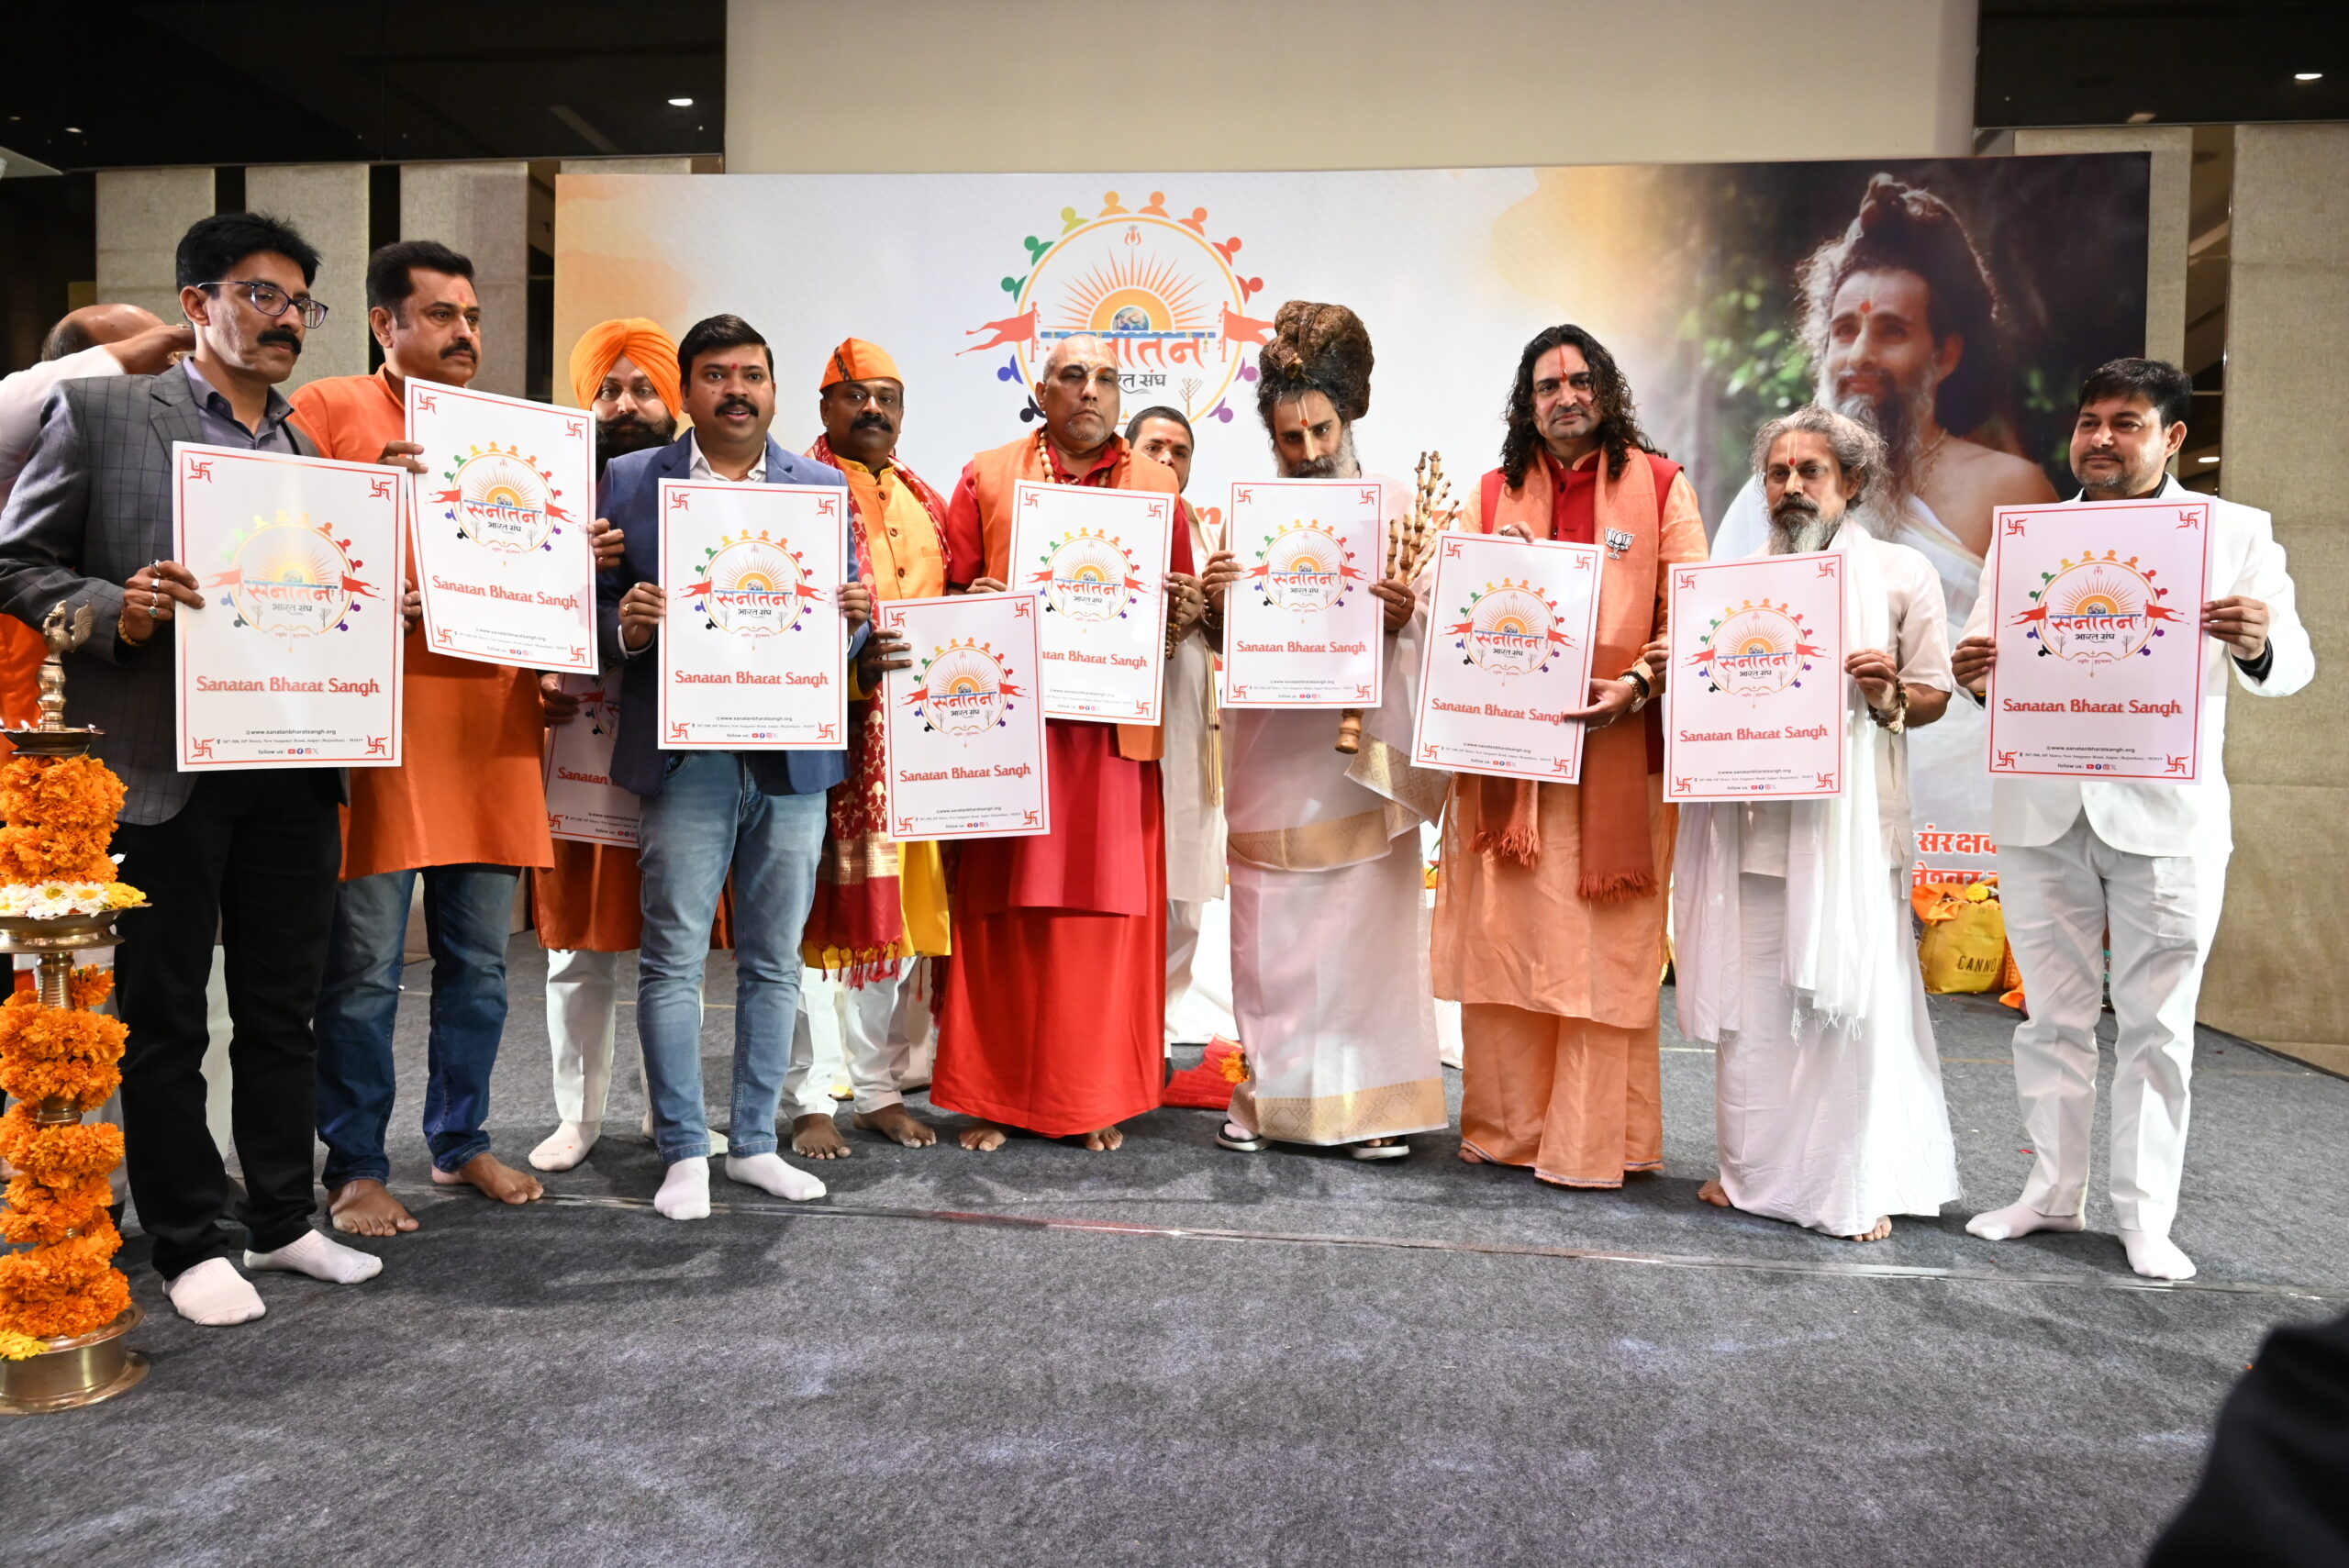 Cultural Heritage, Sanatan Bharat Sangh Logo Unveiling, Spiritual Leadership, Jaipur Event, Traditional Education Revival, Award Ceremony, Empowerment Awards, Ayurvedic Practices, Gurukul Revival, Cultural Outreach, Unity in Diversity, Ancient Indian Traditions